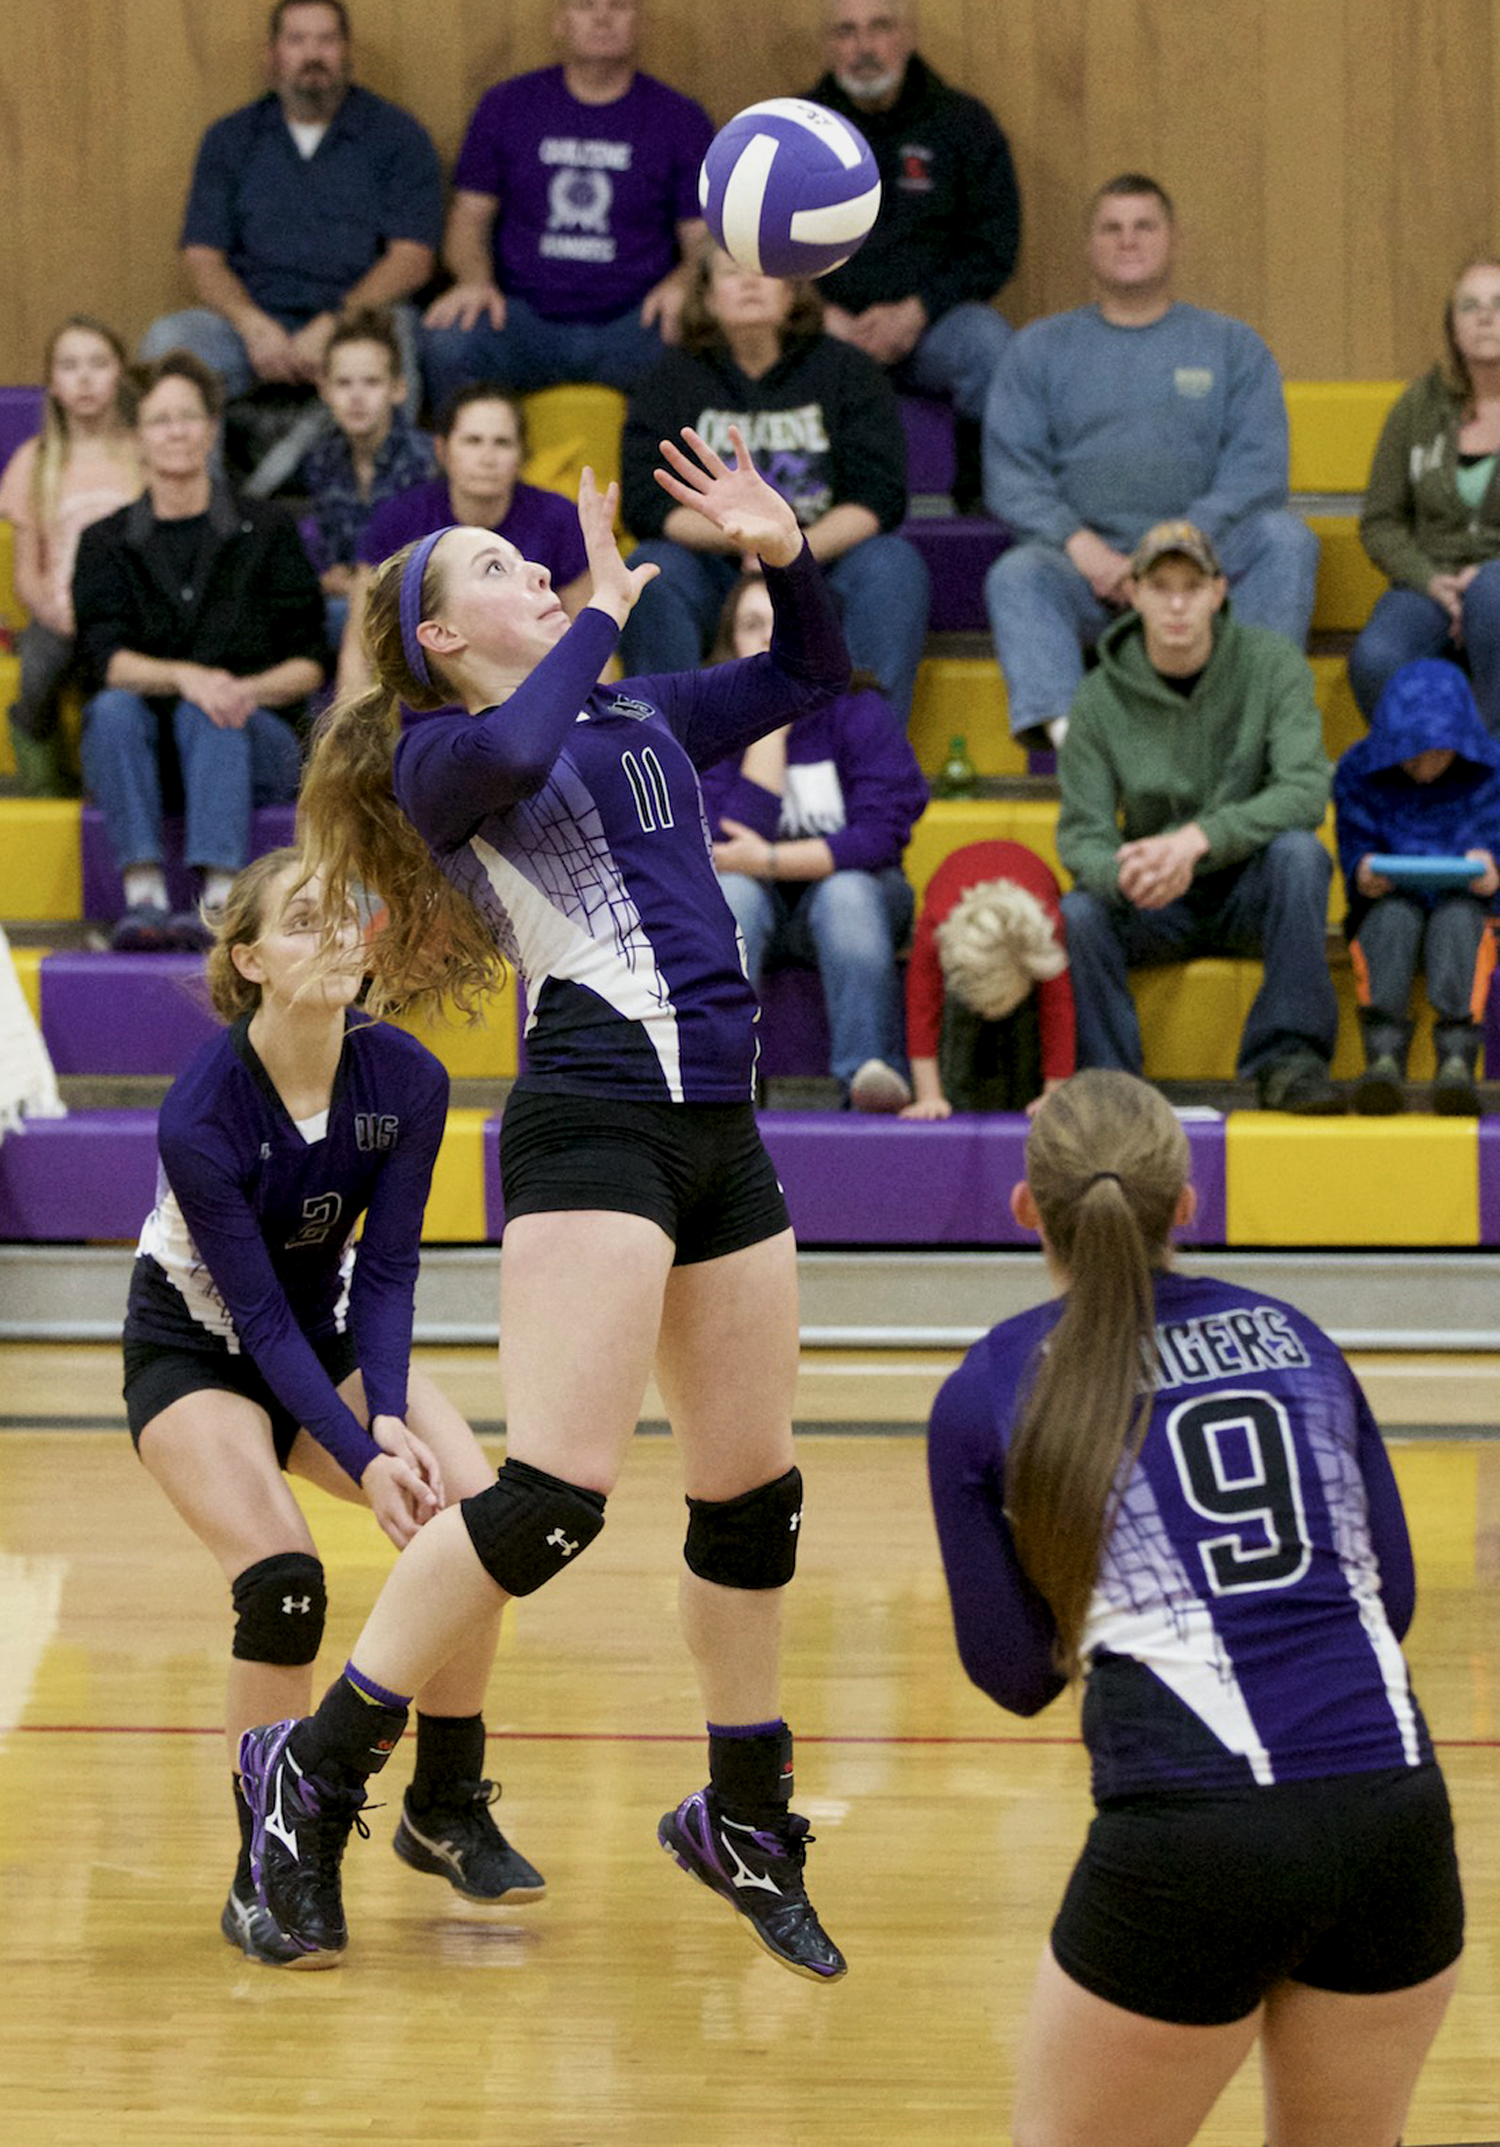 Quilcene's Megan Weller (11) sets the ball for a spike by Allison Jones (9) as Katlin Hitt (3) gets ready to back up the play during the Rangers play-in game win over Shoreline Christian. Steve Mullensky/for Peninsula Daily News